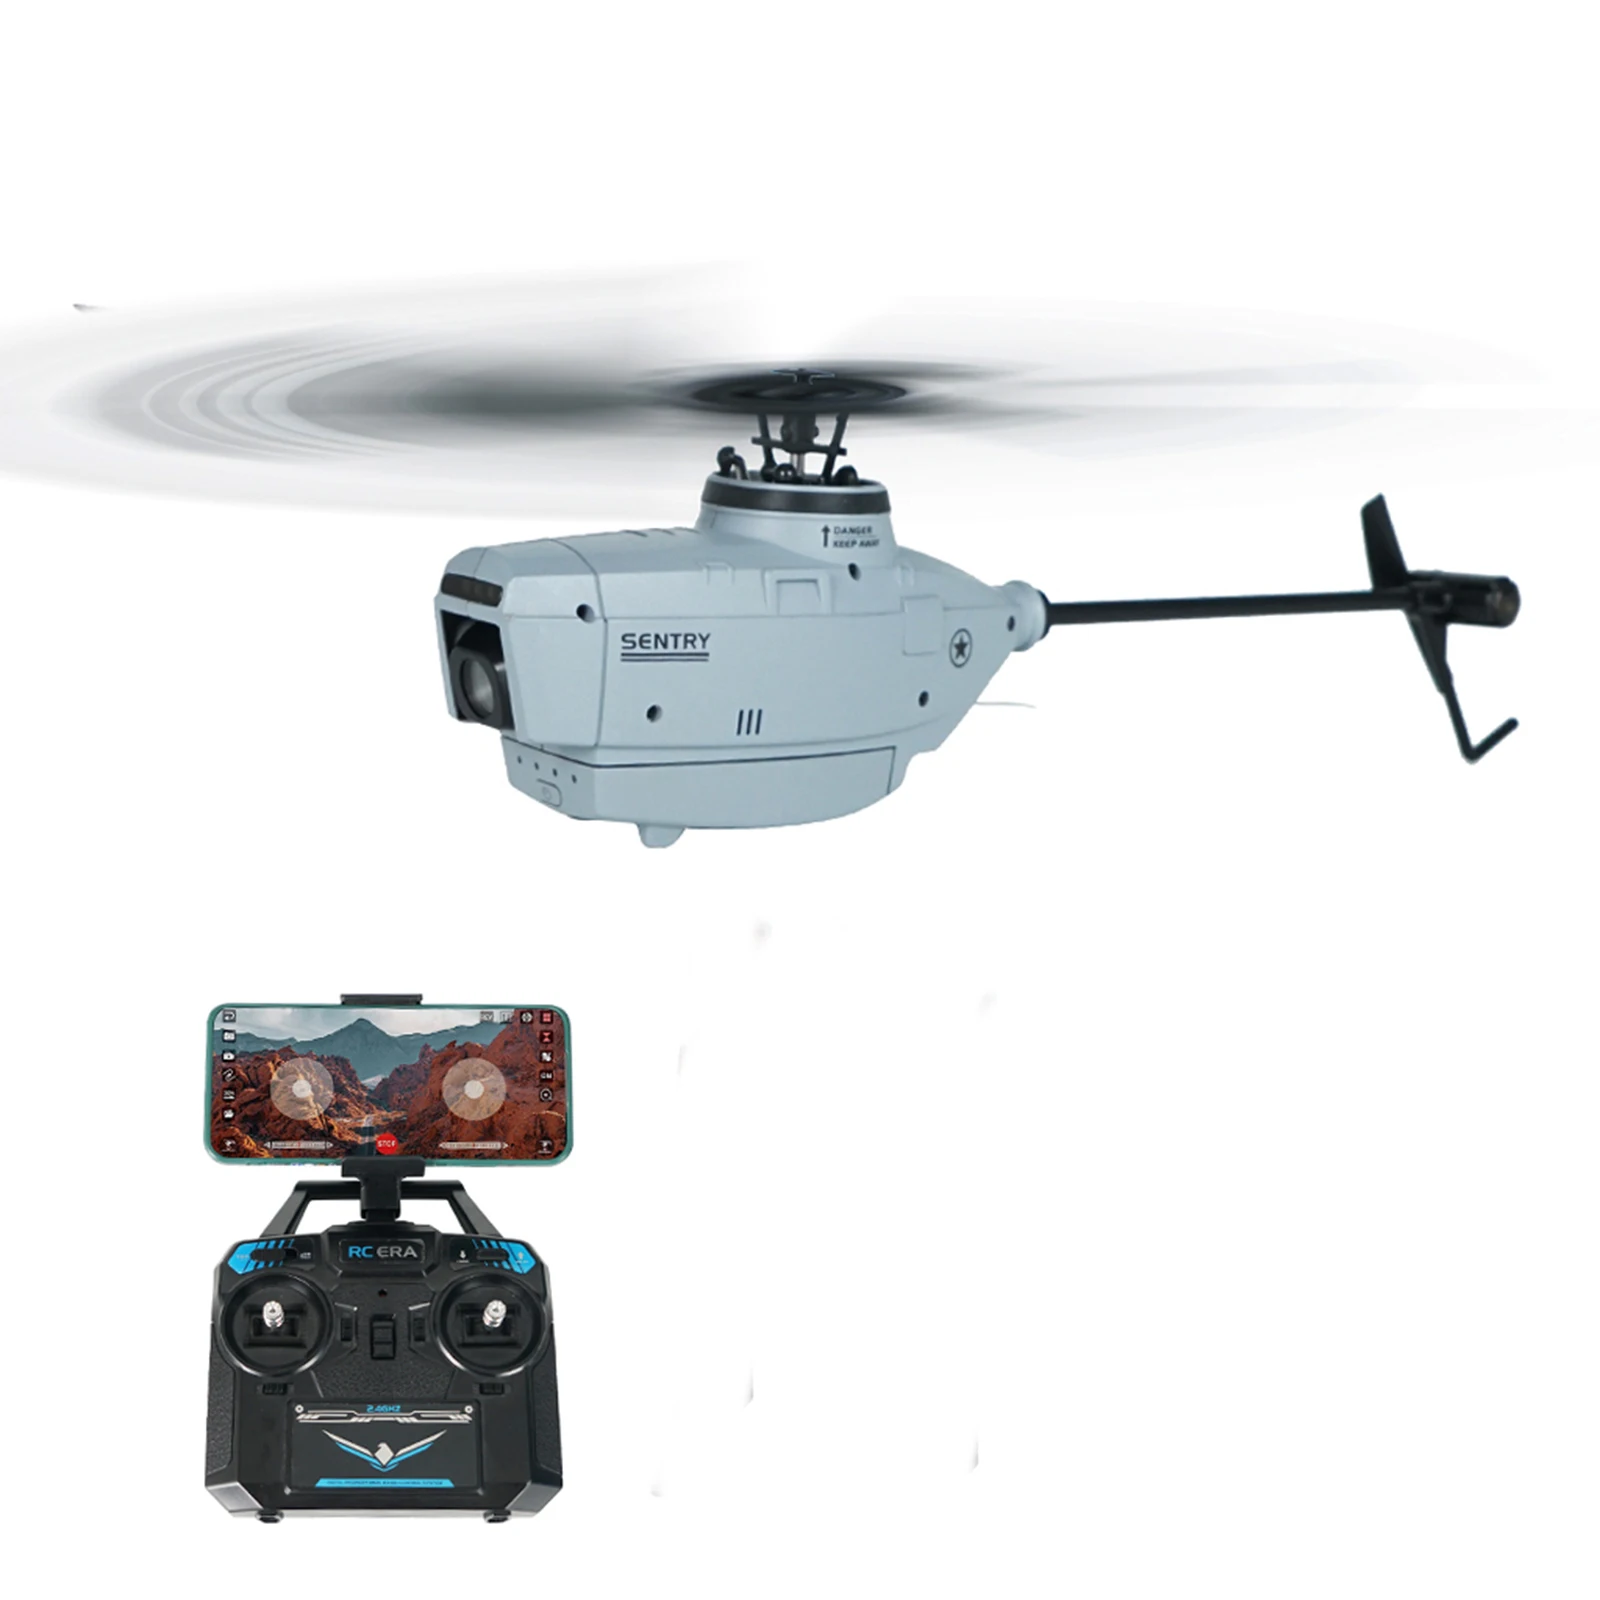 

RC ERA C127 2.4G 4CH 6-Axis Gyro Altitude Hold Optical Flow Localization Flybarless RTF Sentry Helicopter with 720P Camera Drone